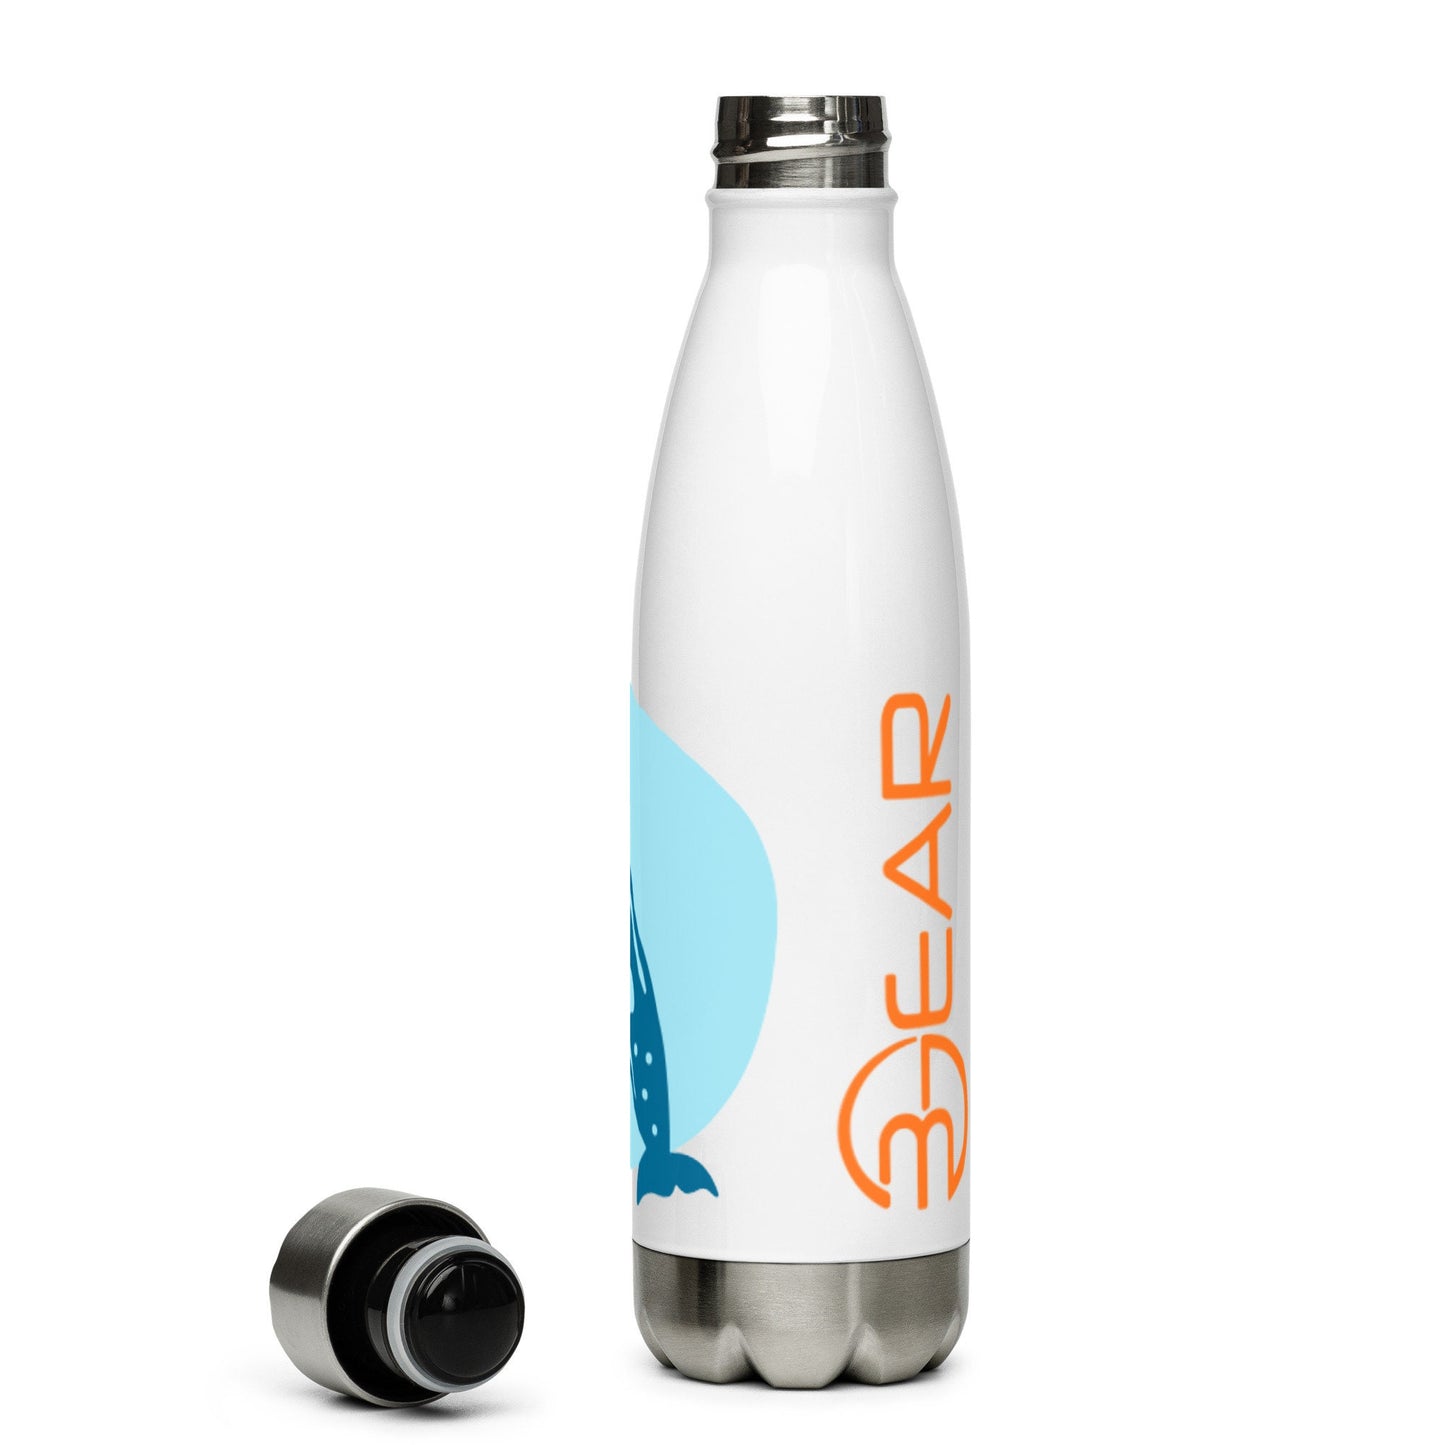 BGear Stainless Steel Water Bottle Glossy Double Wall Vacuum Flask Bottle with Leak Proof Cap 6 Hours Support Hot and Cold Liquids Bottle